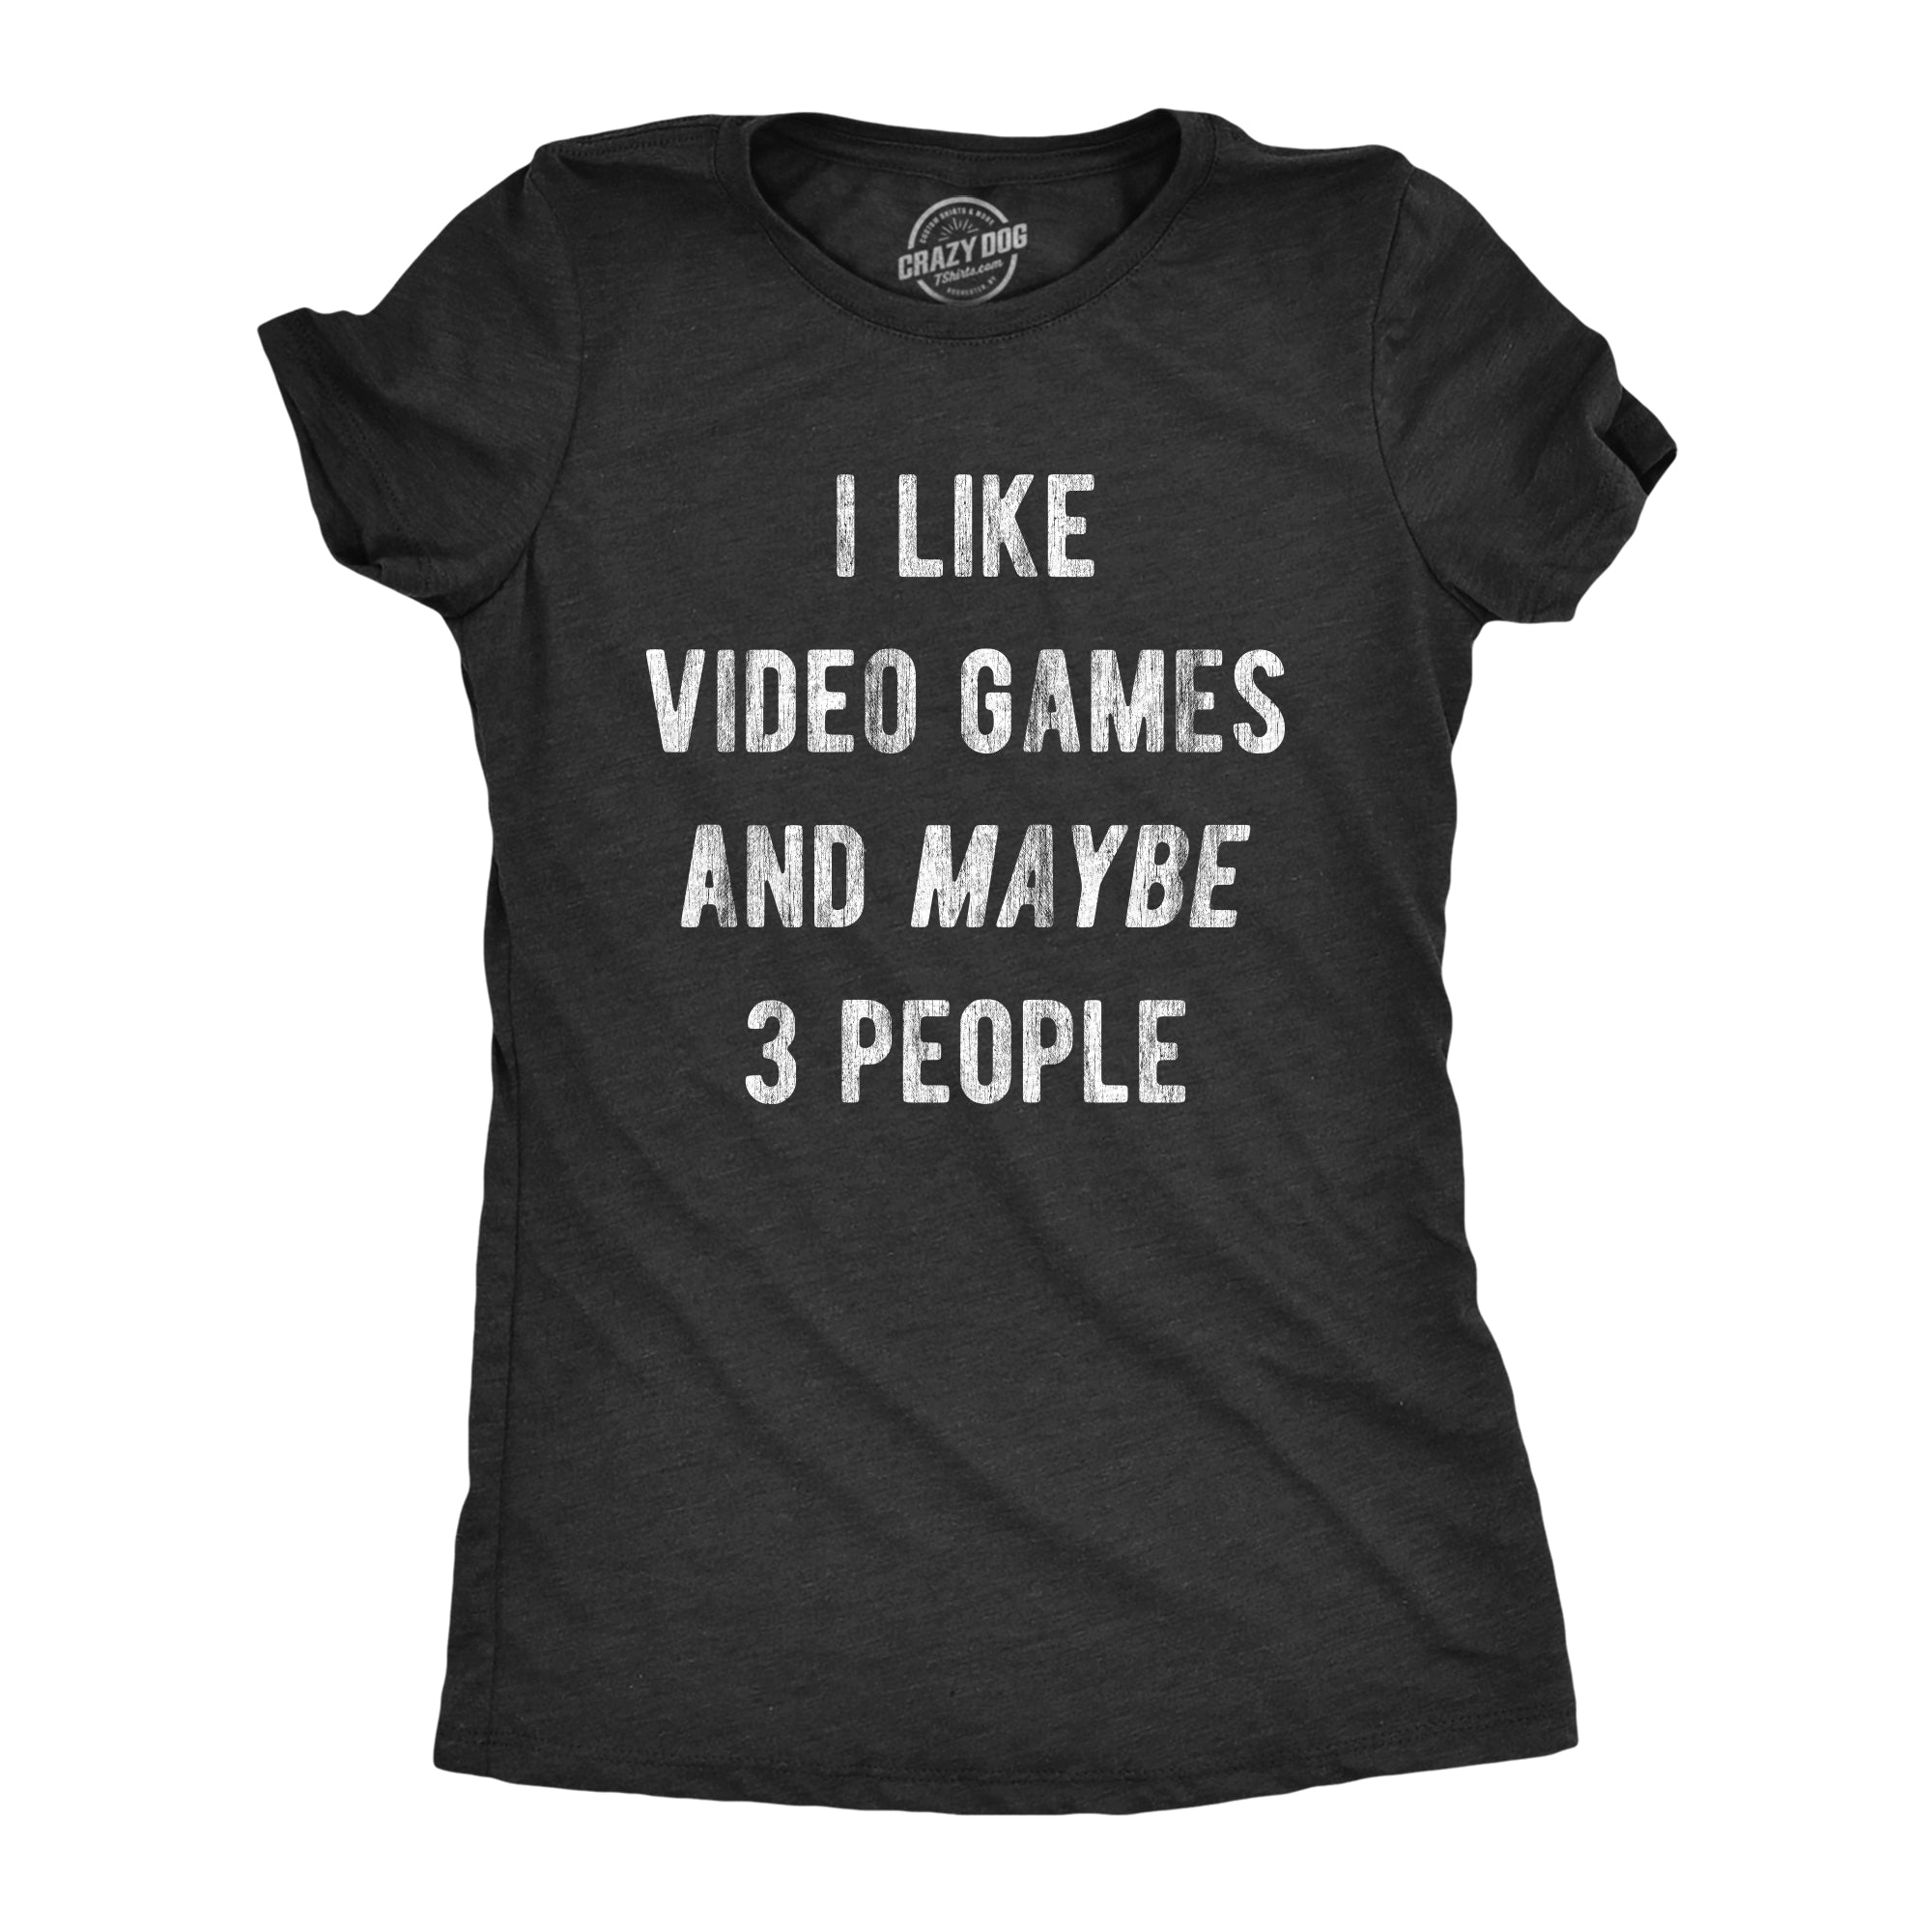 Funny Heather Black I Like Video Games And Maybe 3 People Womens T Shirt Nerdy Video Games introvert introvert Tee